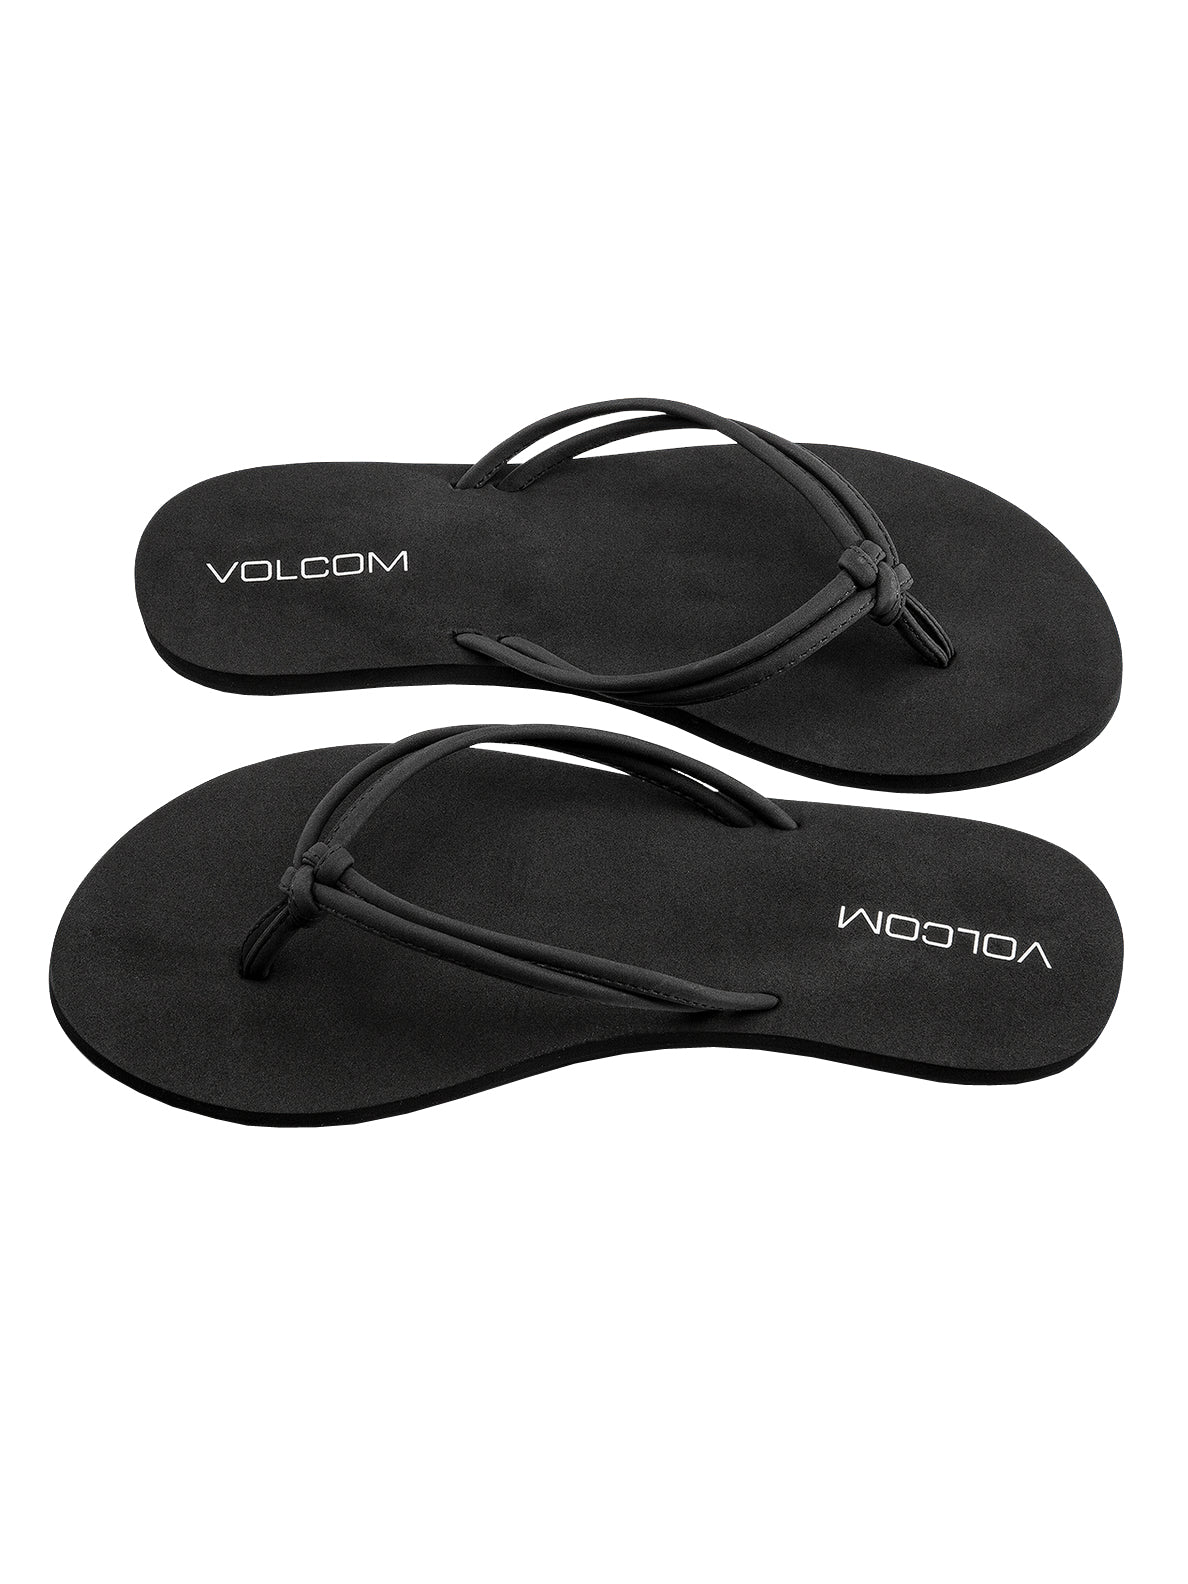 Volcom Forever and Ever 2 Womens Sandal BKO23-Black Out 7